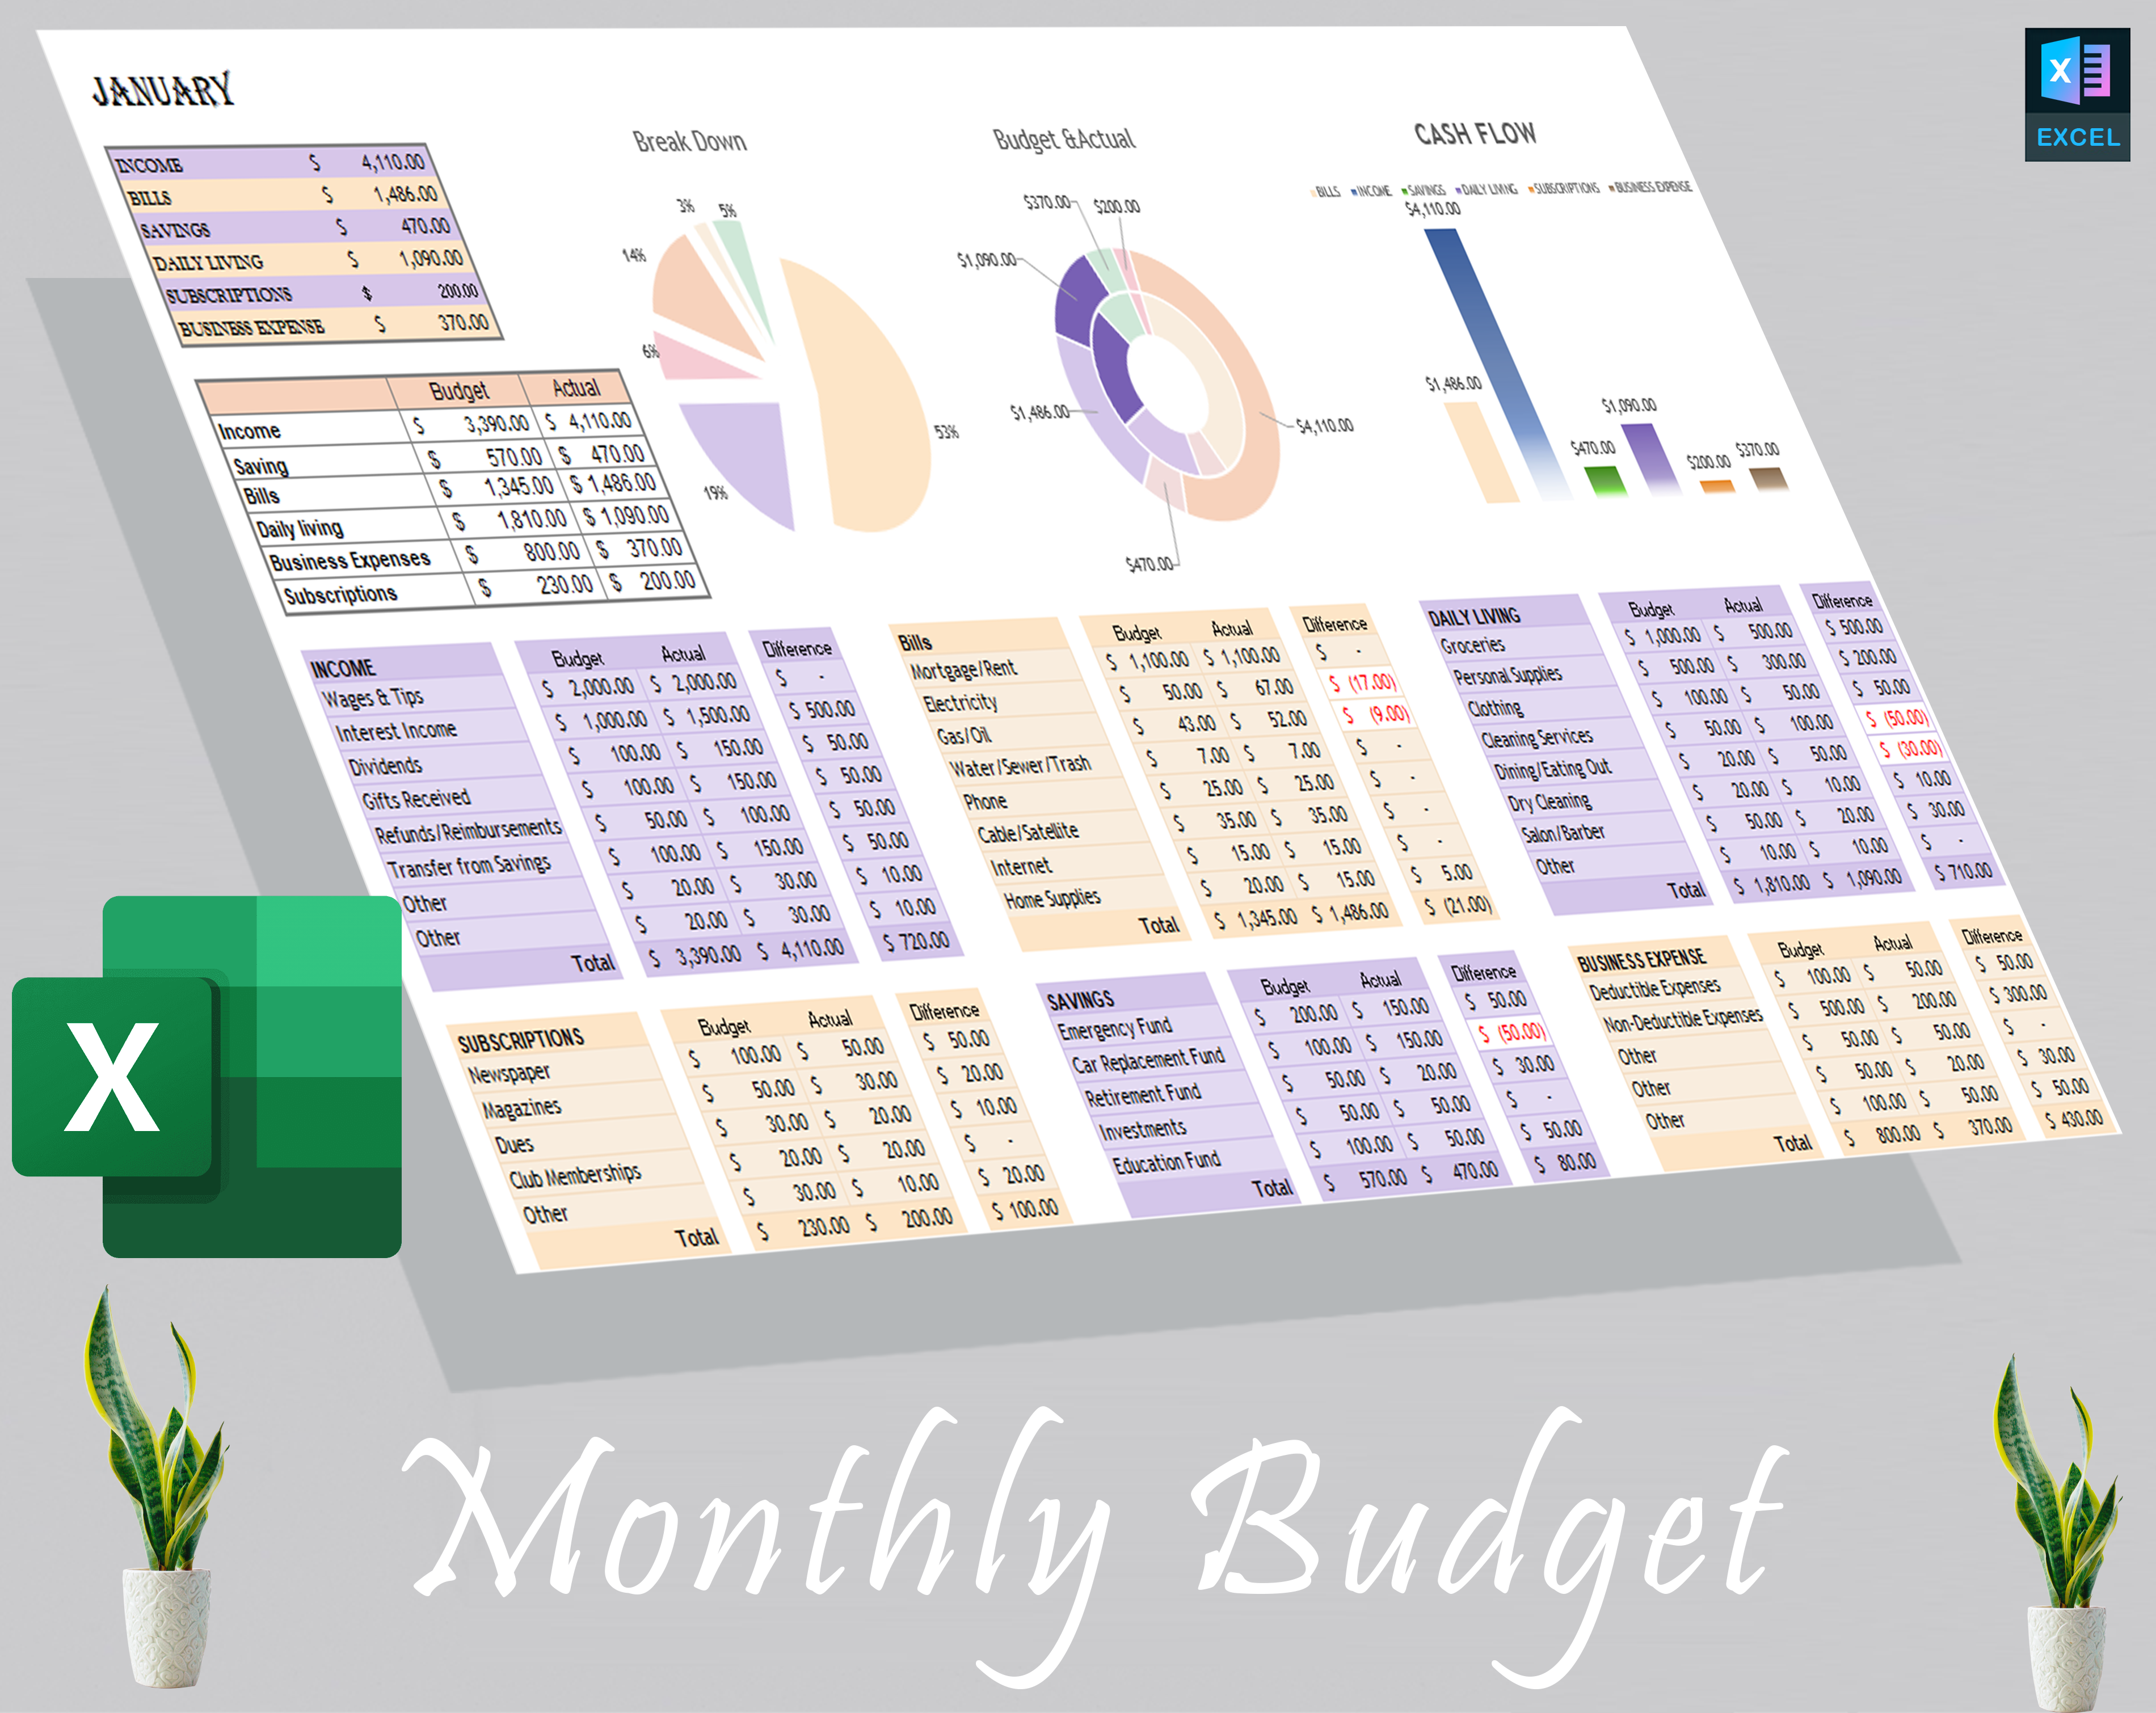 Monthly Budget Dashboard